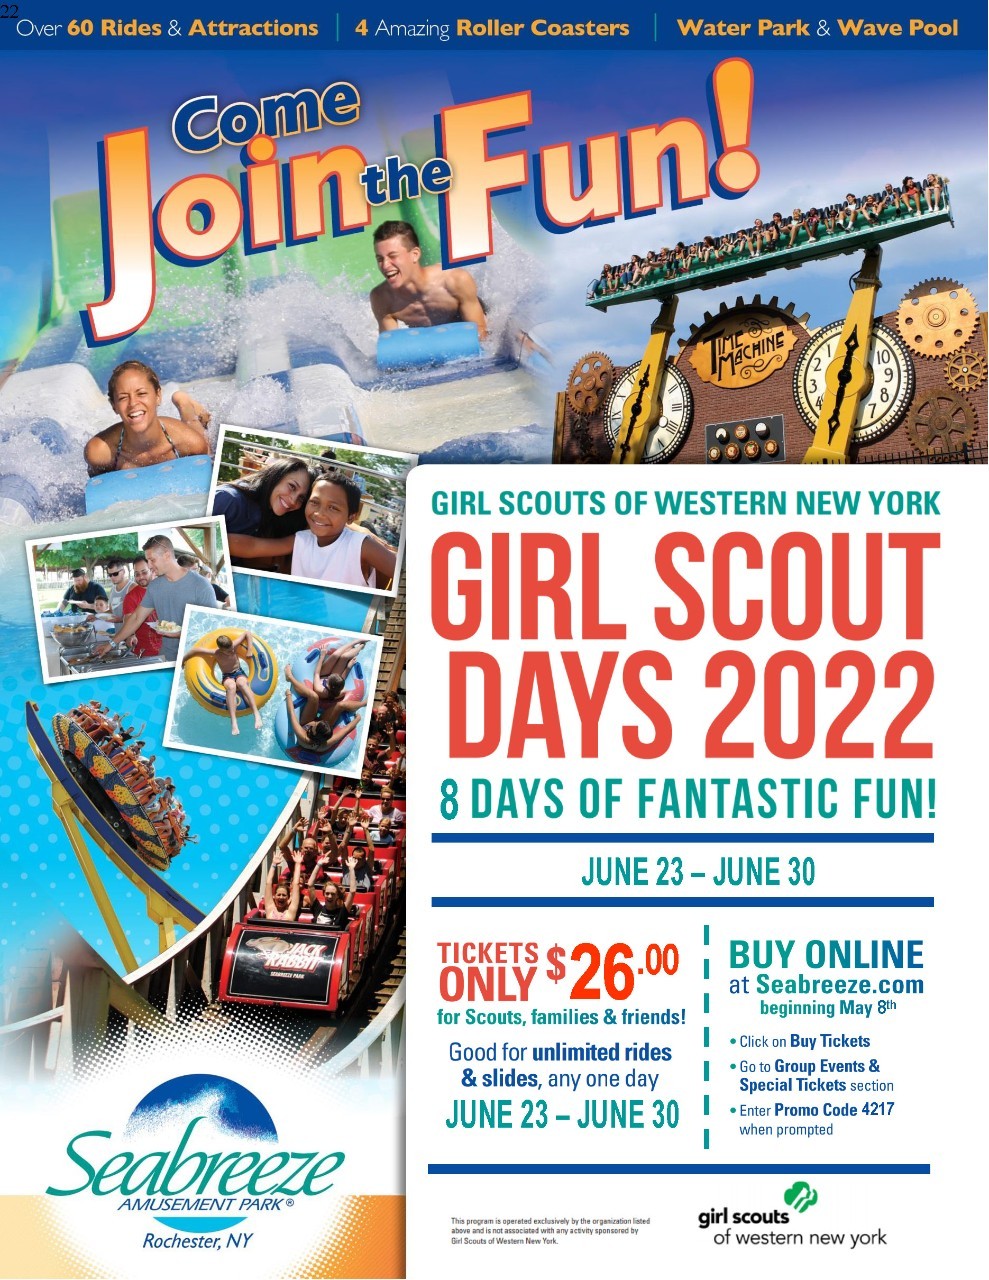 June 23 -30 2022 Girl Scout Days at Seabreeze